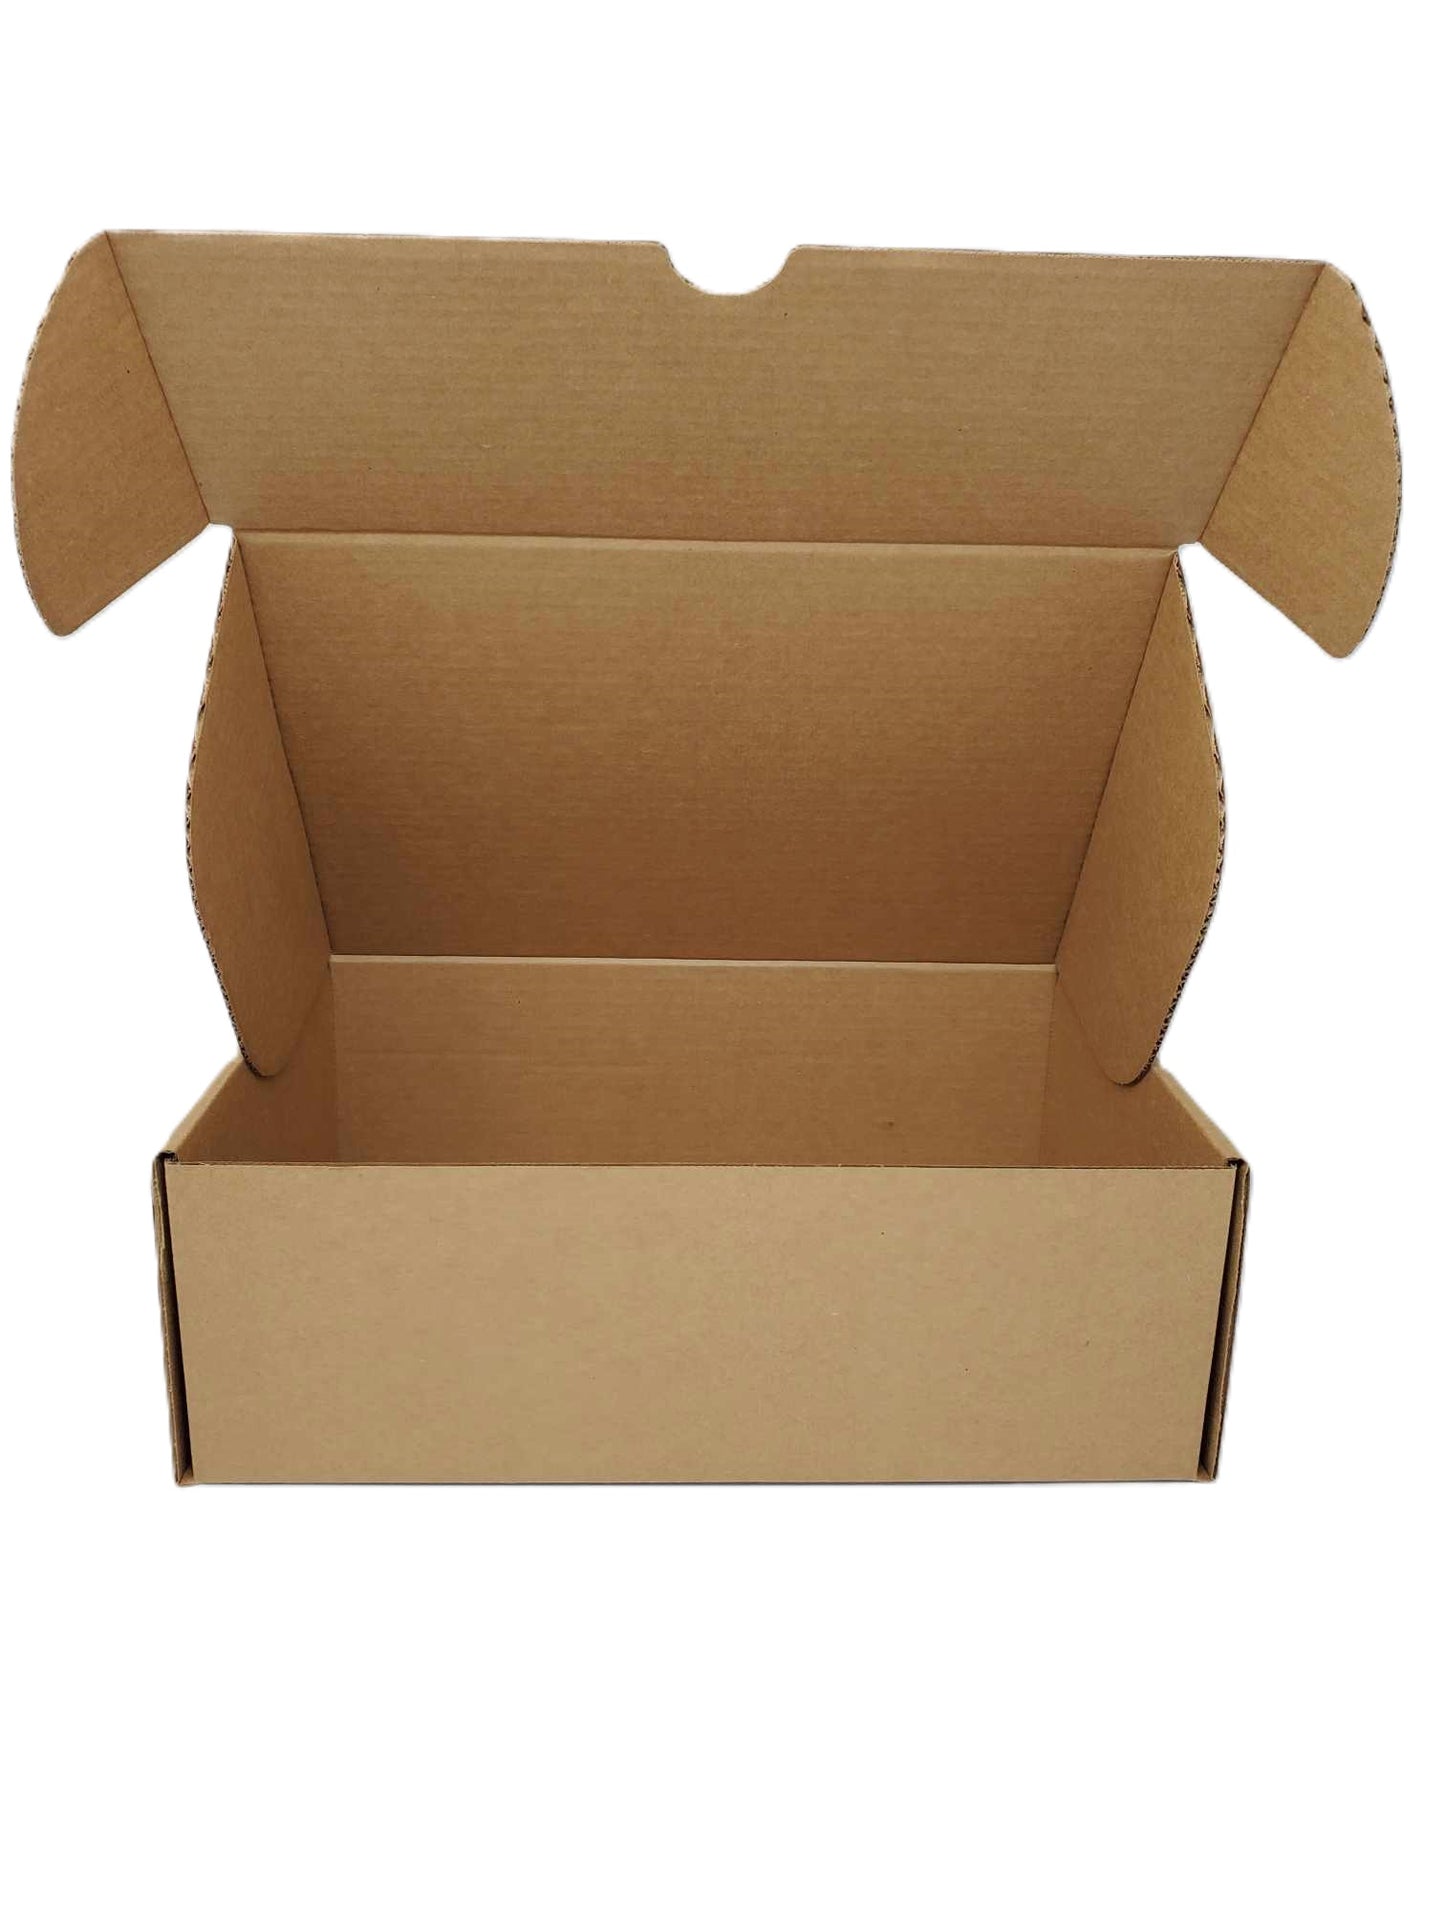 BEST Shipping and Replacement SHOE BOXES - HEAVY DUTY - 14.5" X 9.25" X 5.25" - Self Locking - Repackaging Message on The Box - Fast, Easy to Build